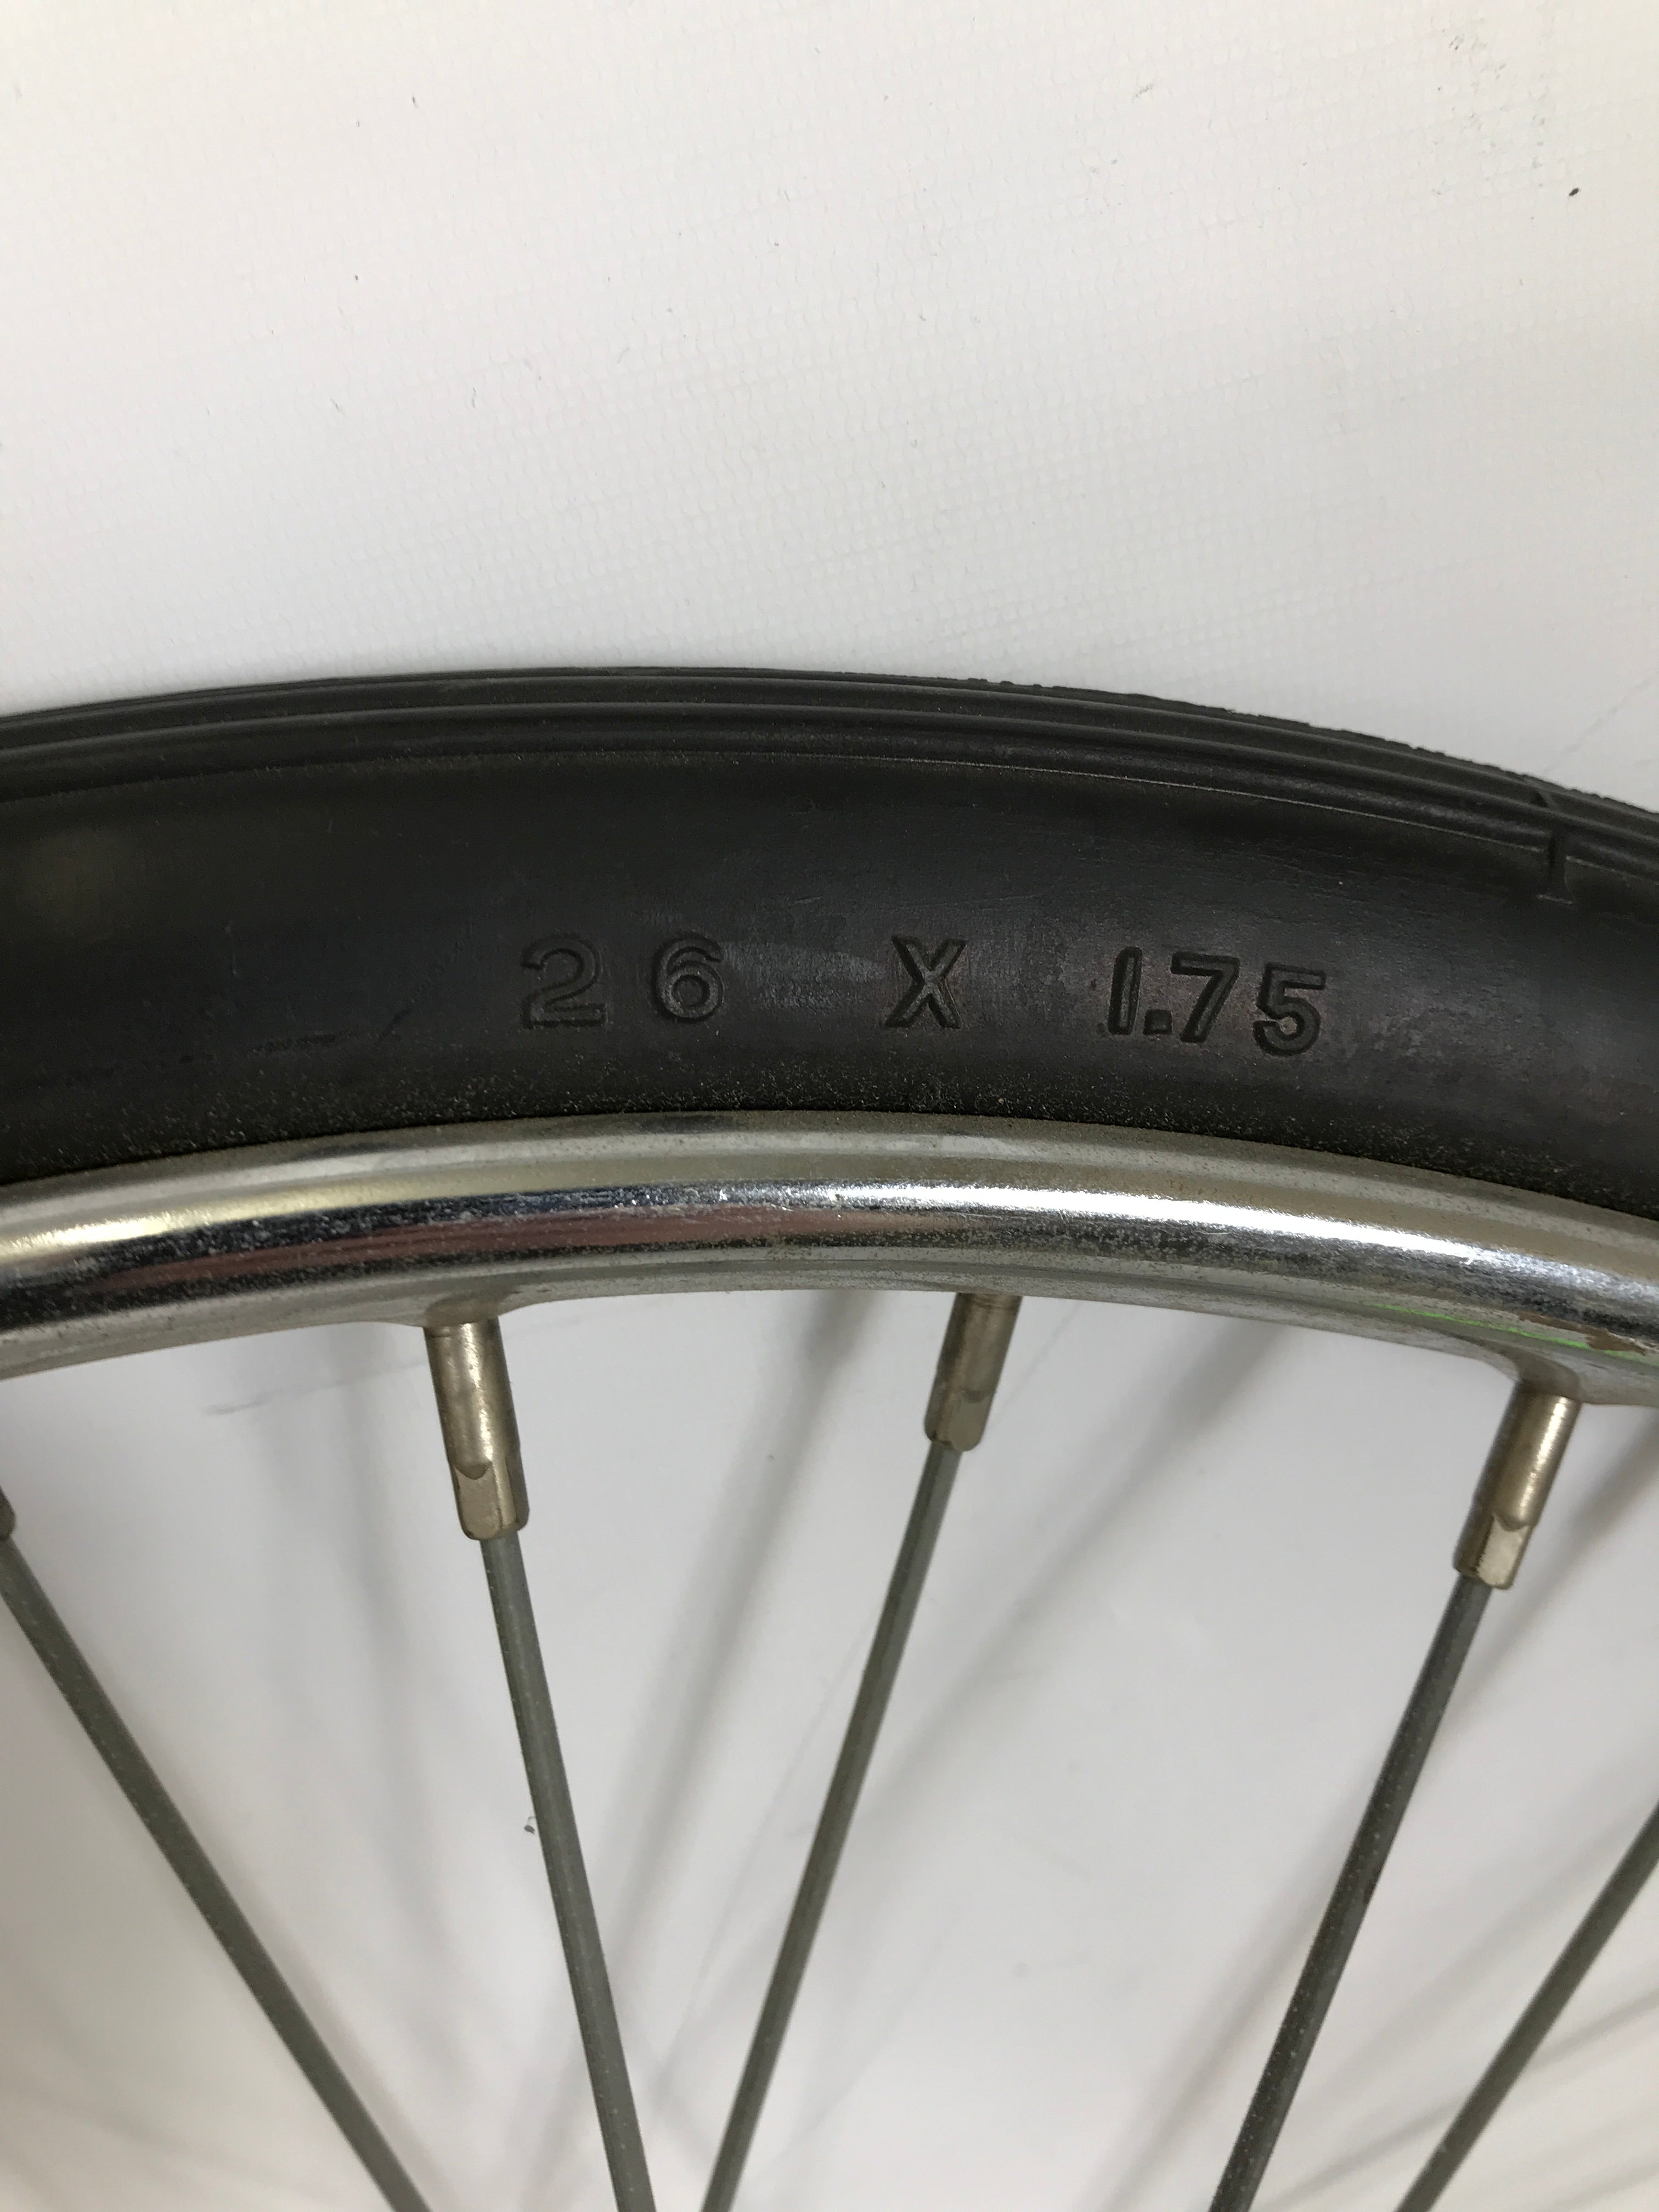 26" Worksman Cycle Rear Rim with 26x1.75 Tubeless Tire #2